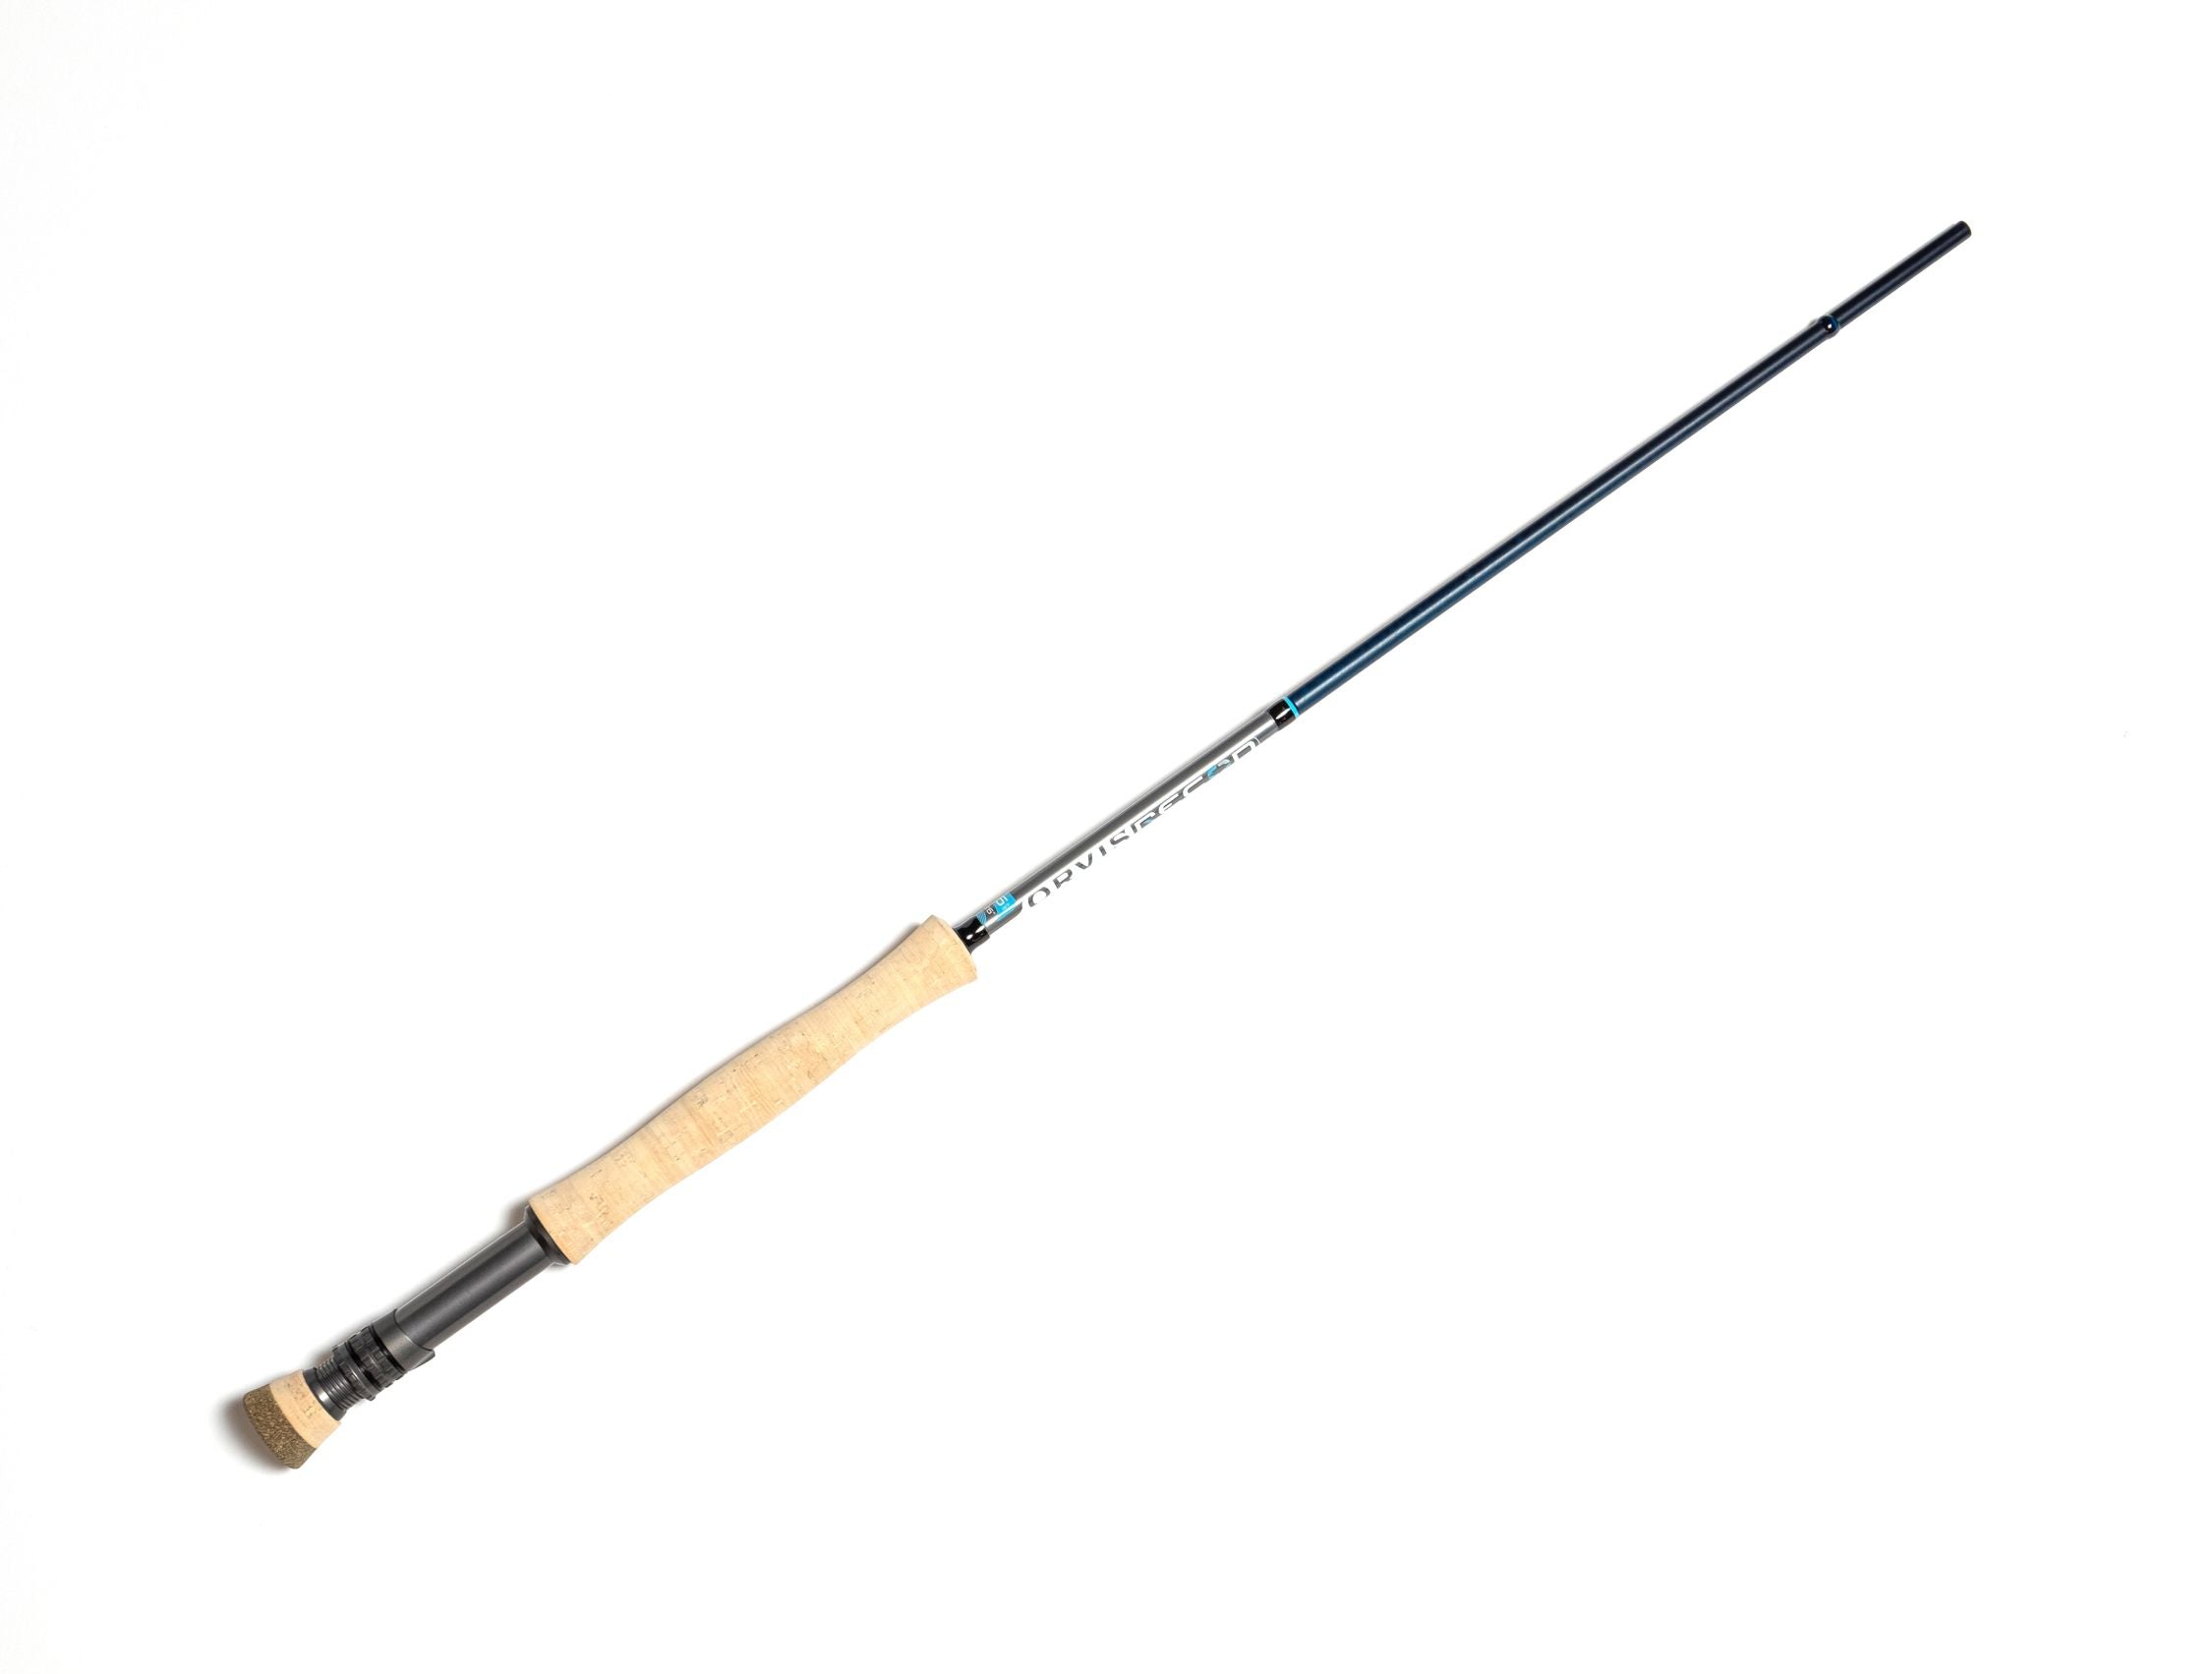 Orvis Recon Freshwater Fly Rod